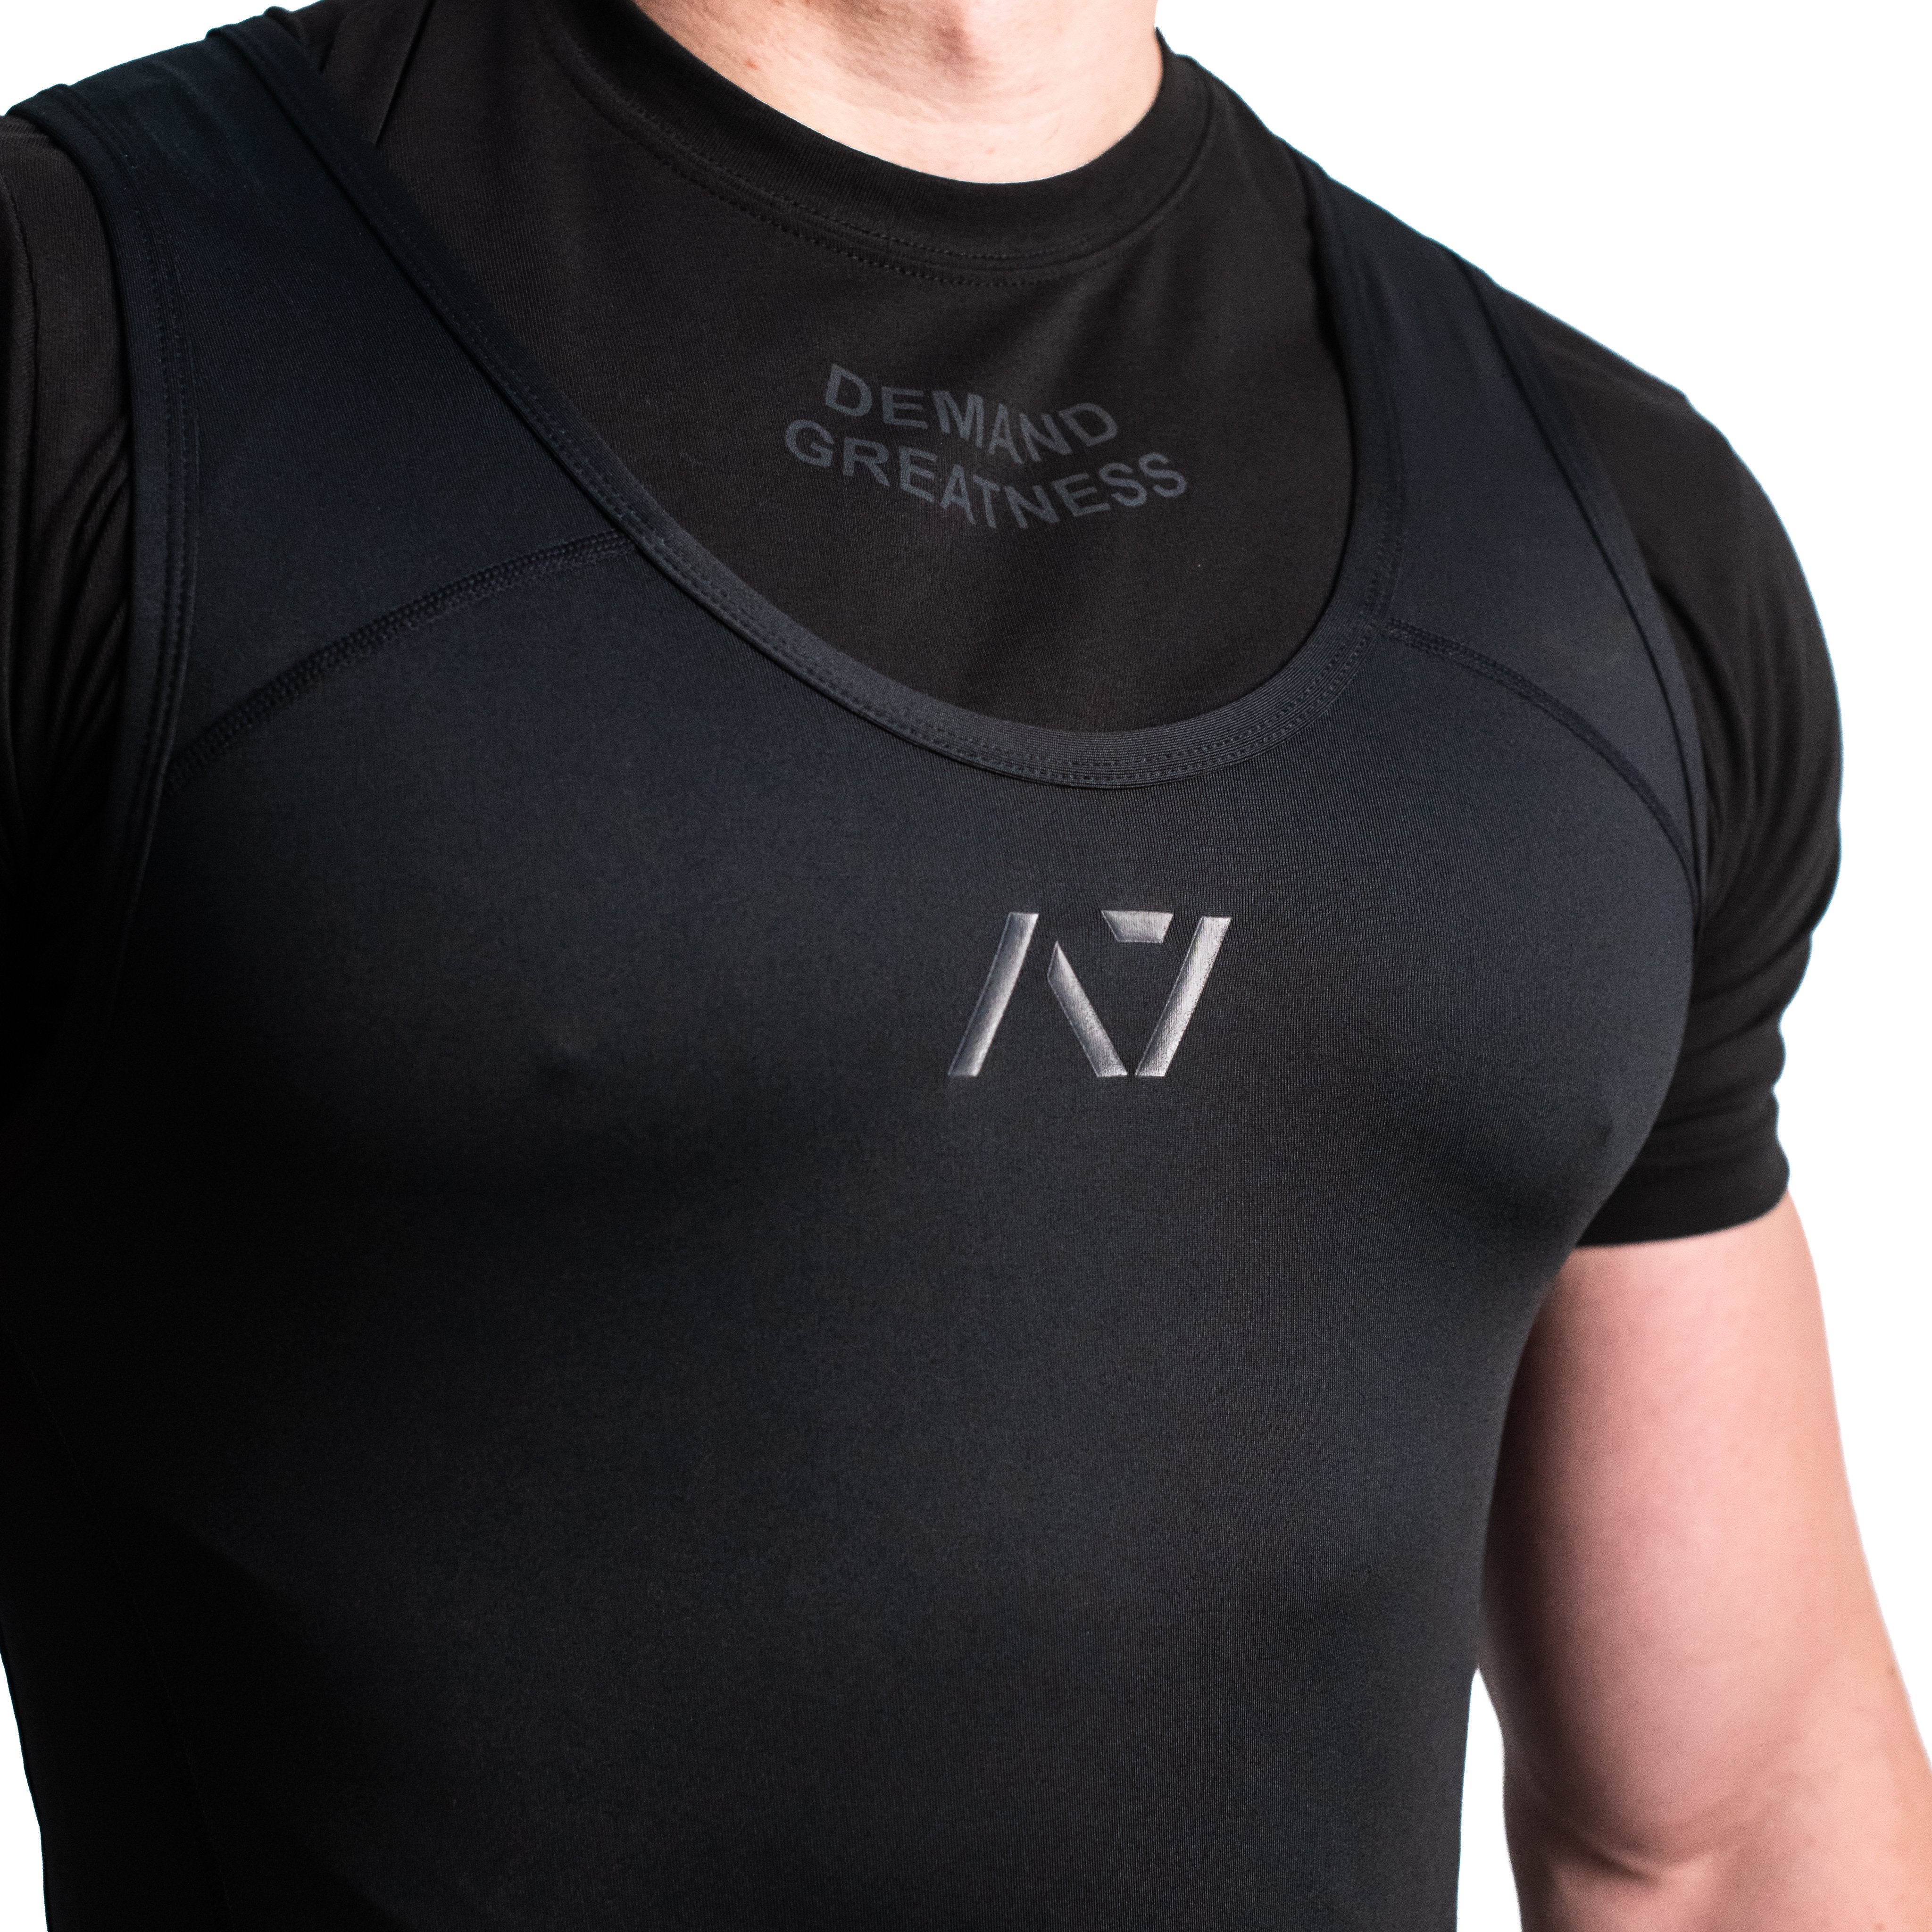 A7 IPF Approved Powerlifting Singlet is designed exclusively for powerlifting. It is very comfortable to wear and feels soft on bare skin. A7 Powerlifting Singlet is made from breathable fabric and provides compression during your lifts. The perfect piece of IPF Approved Kit! A7 Europe shipping to EU including France, Italy, Poland, Sweden, Netherlands.